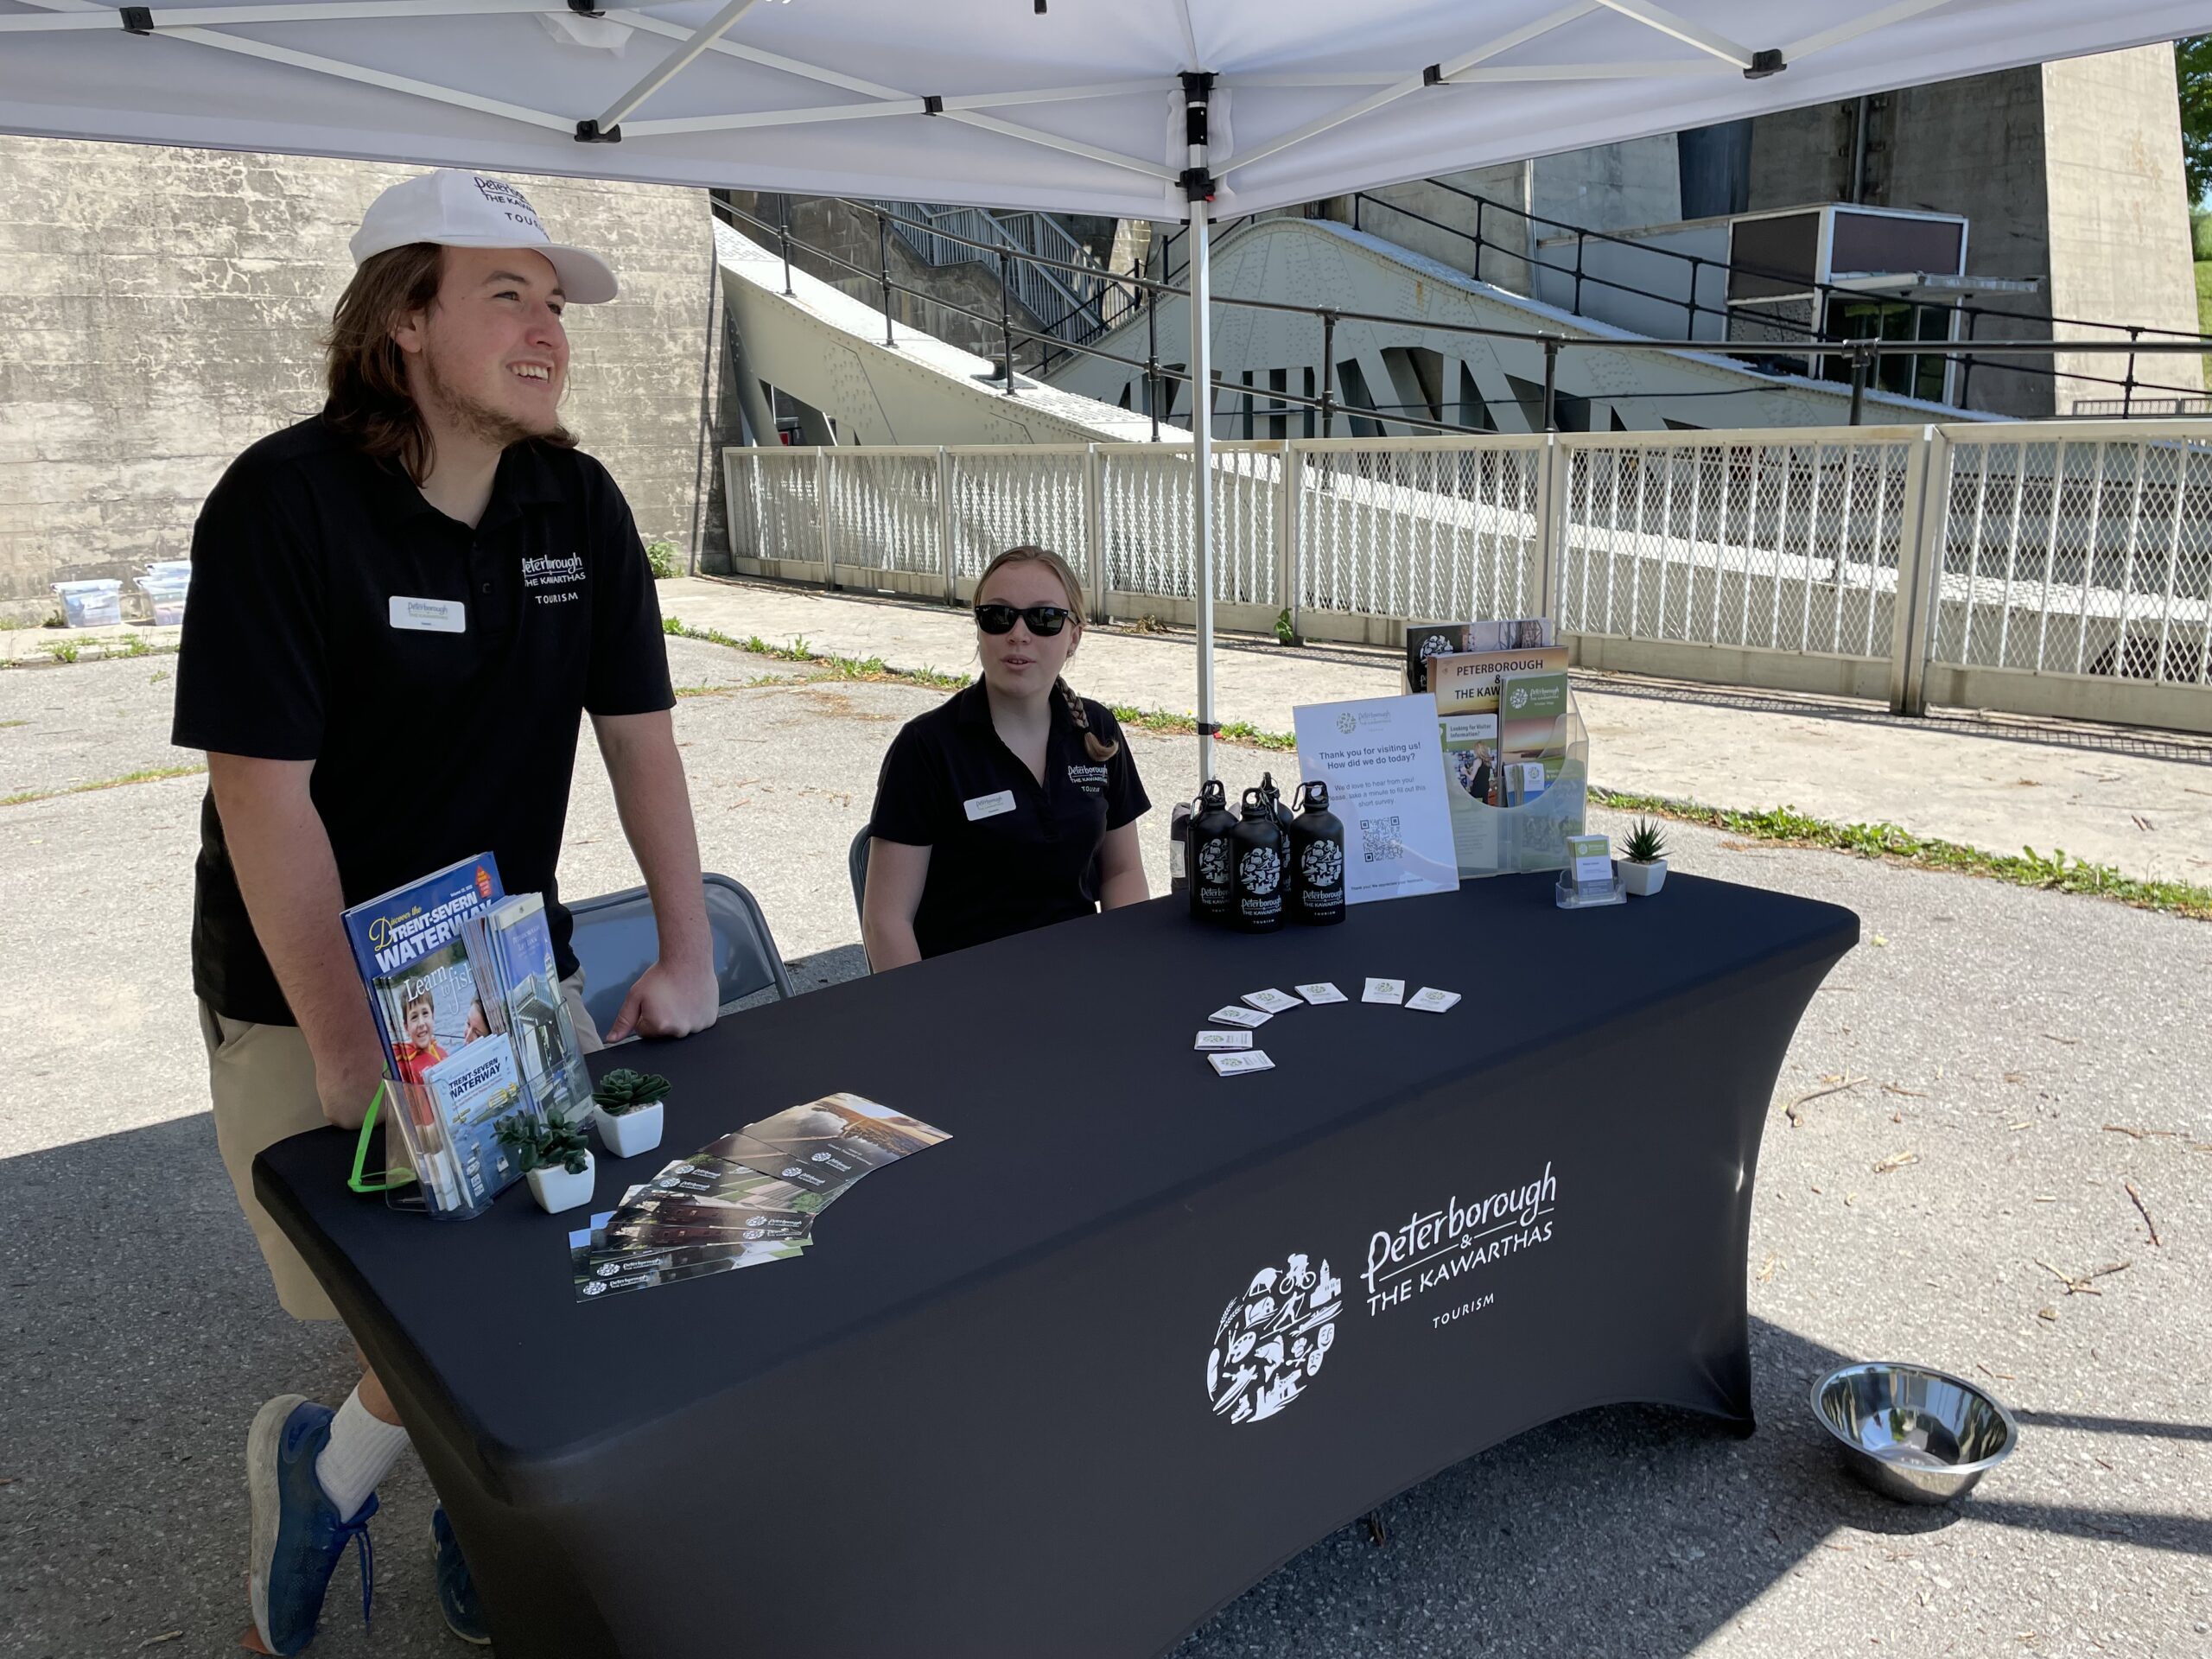 Person in black shirt, white hat standing behind table with brochures and black table cloth. A person in a black shirt and sunglasses sitting behind the table sitting